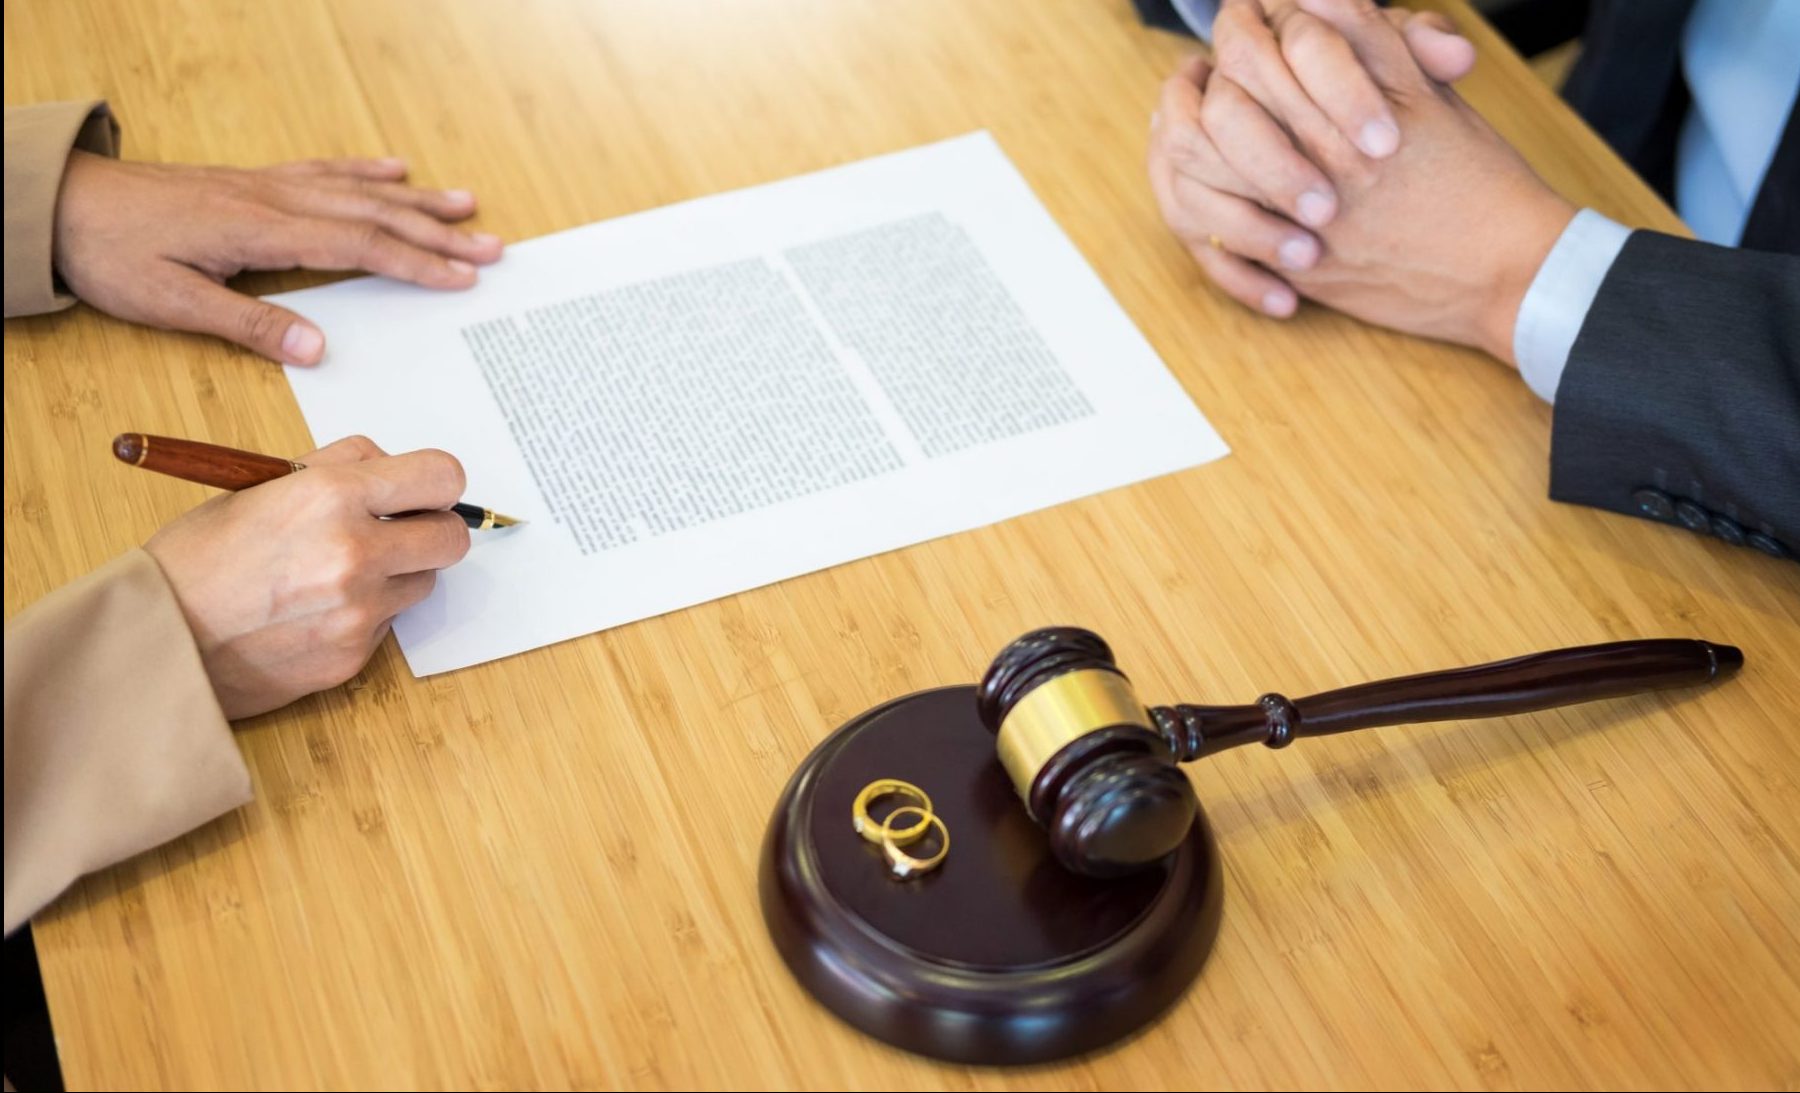 Important Questions to Ask a Divorce Lawyer at Your Initial Meeting